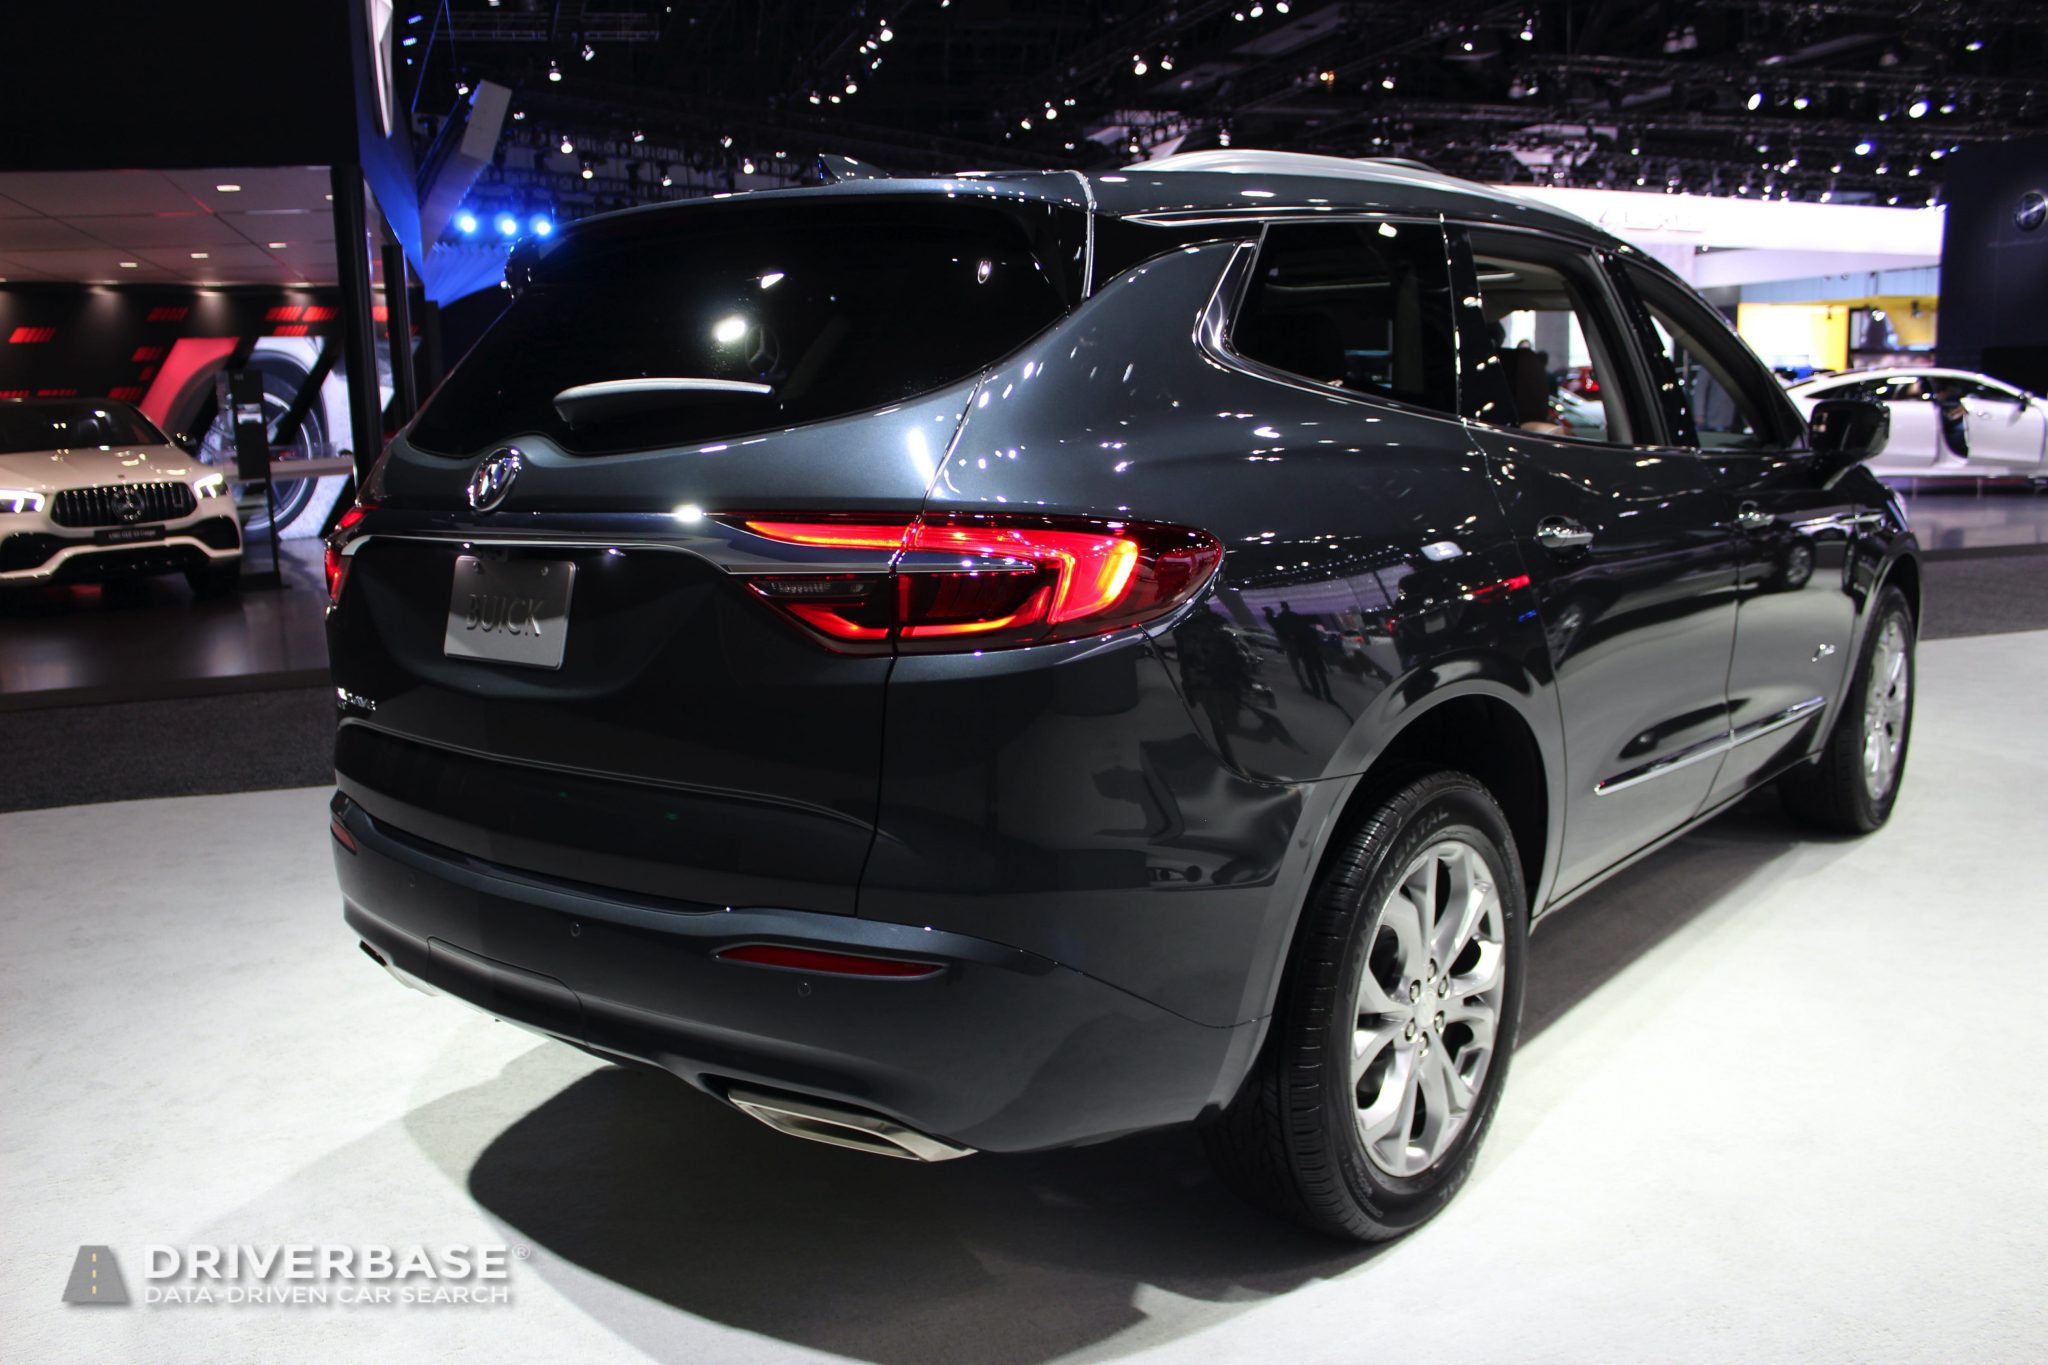 2020 Buick Enclave at the 2019 Los Angeles Auto Show